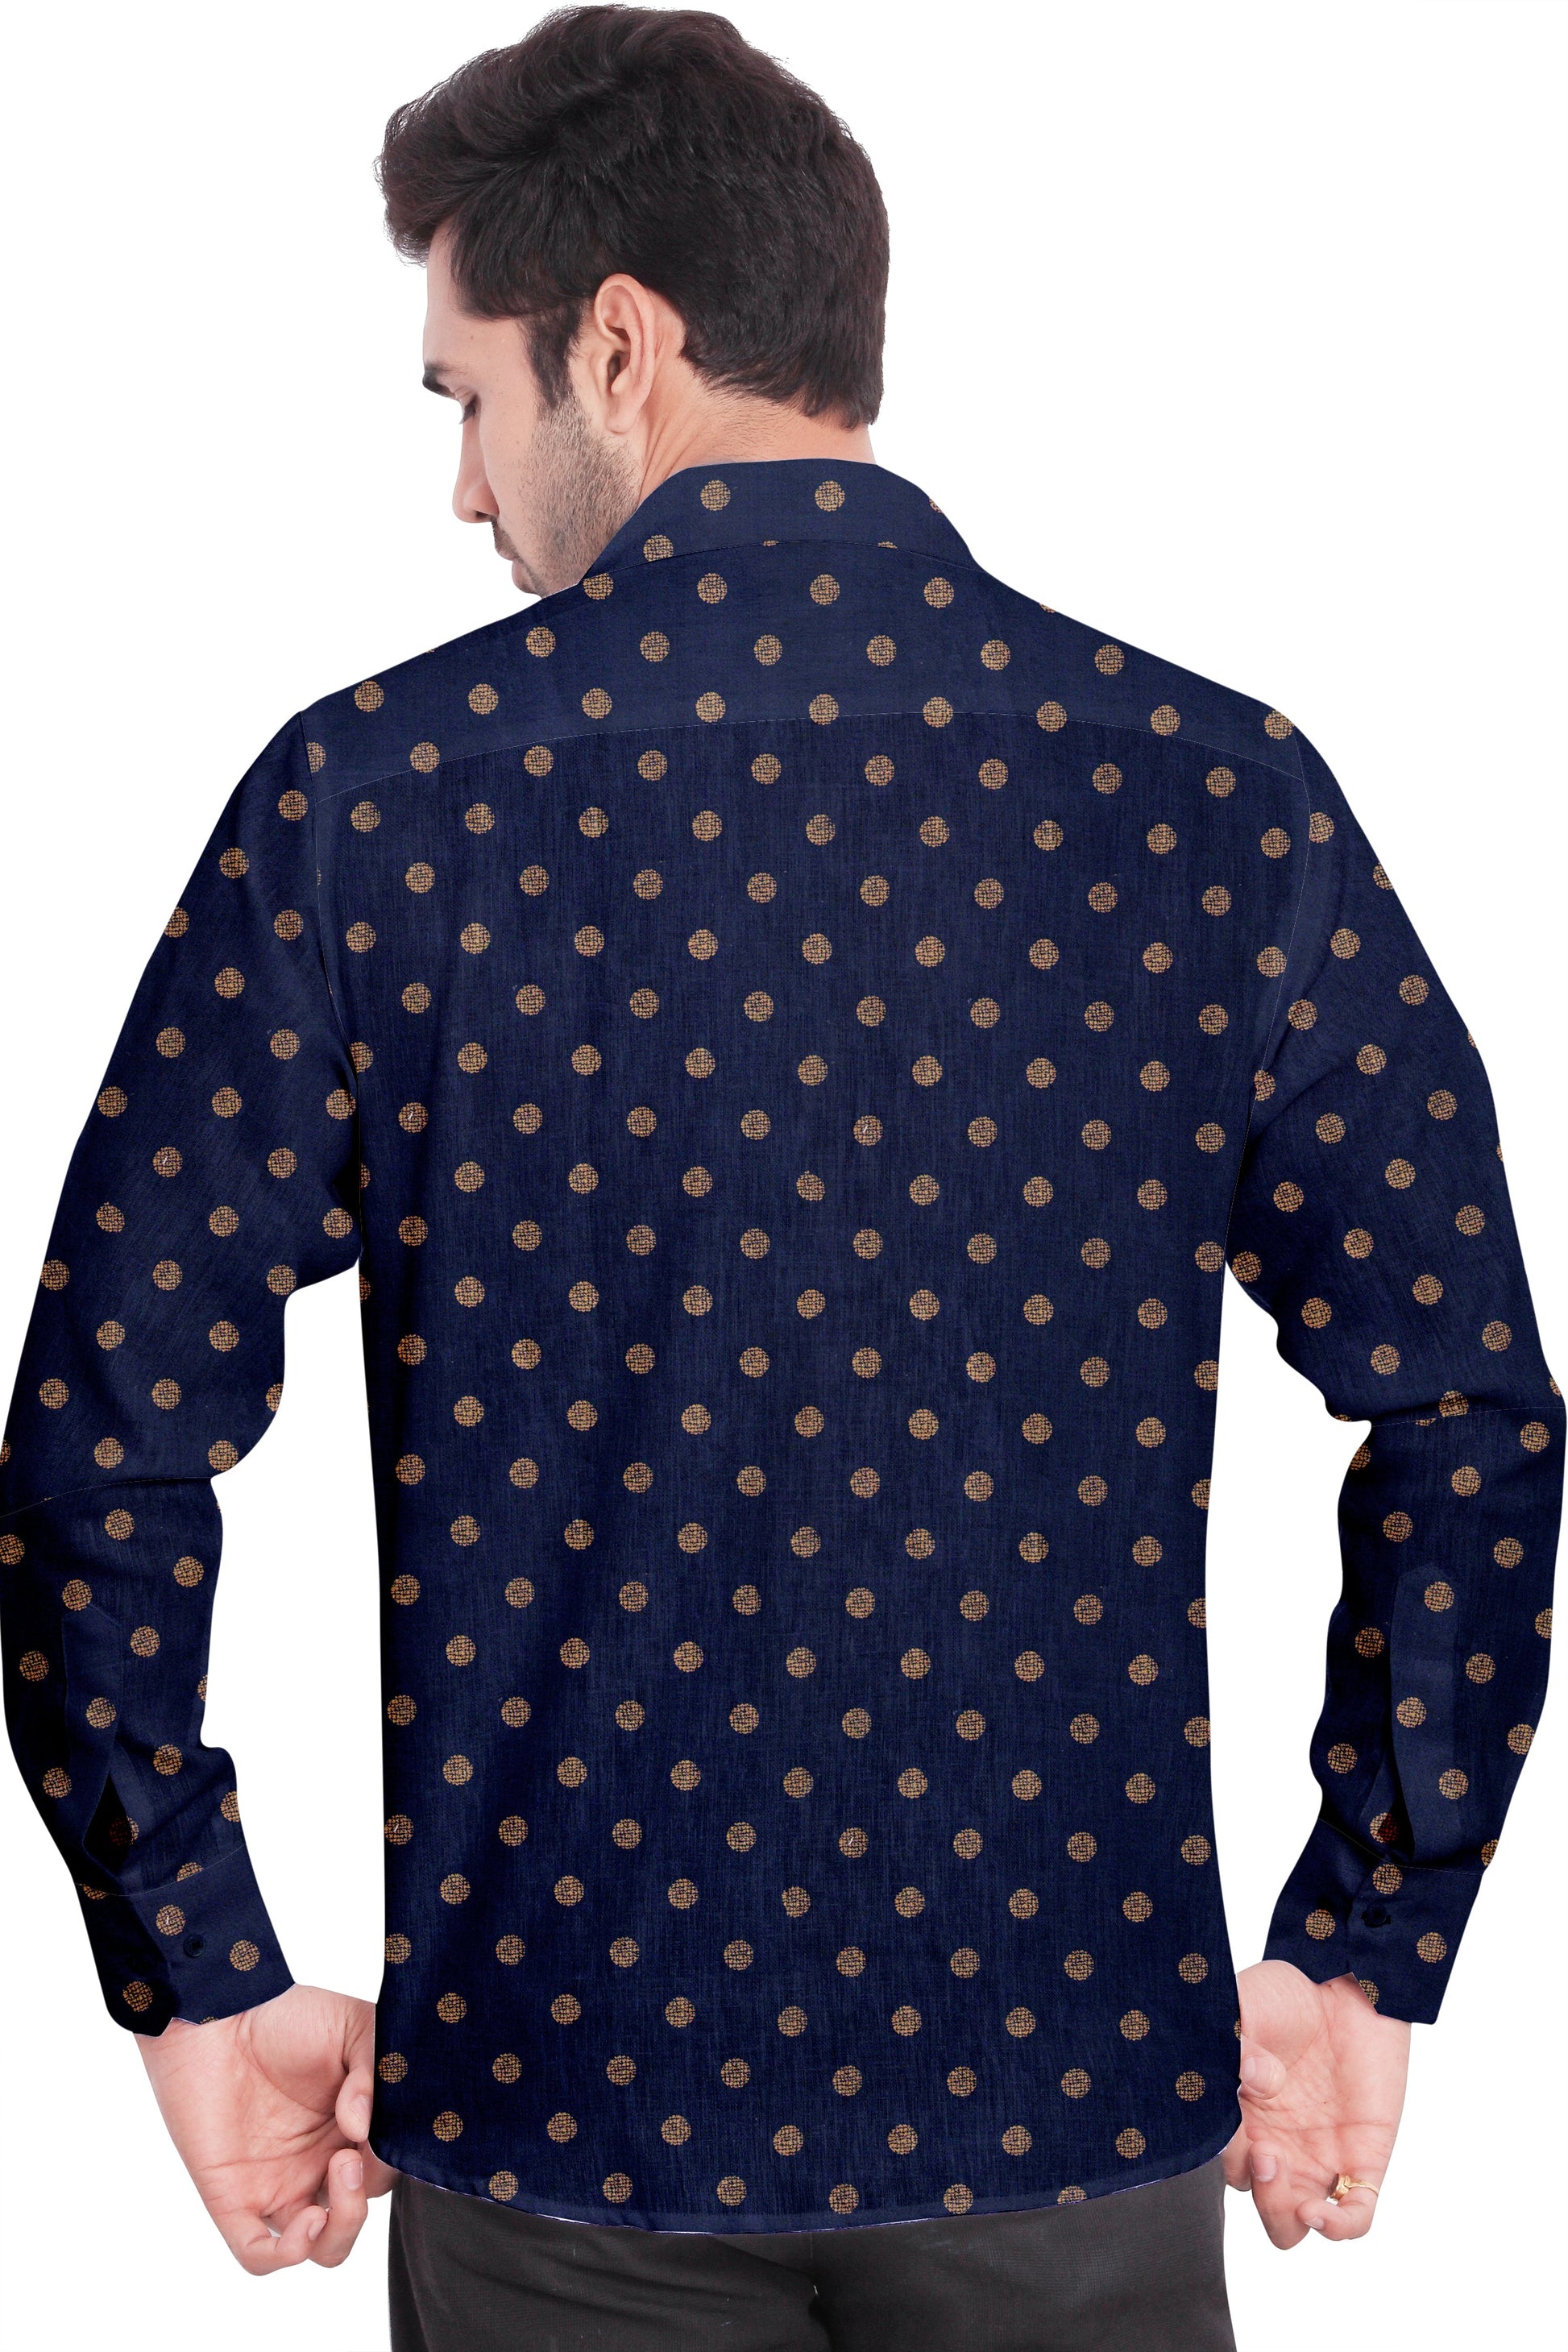 Men's Blue Yellow Dotted Casual Shirt Full Sleeves 100% Cotton - Styleflea